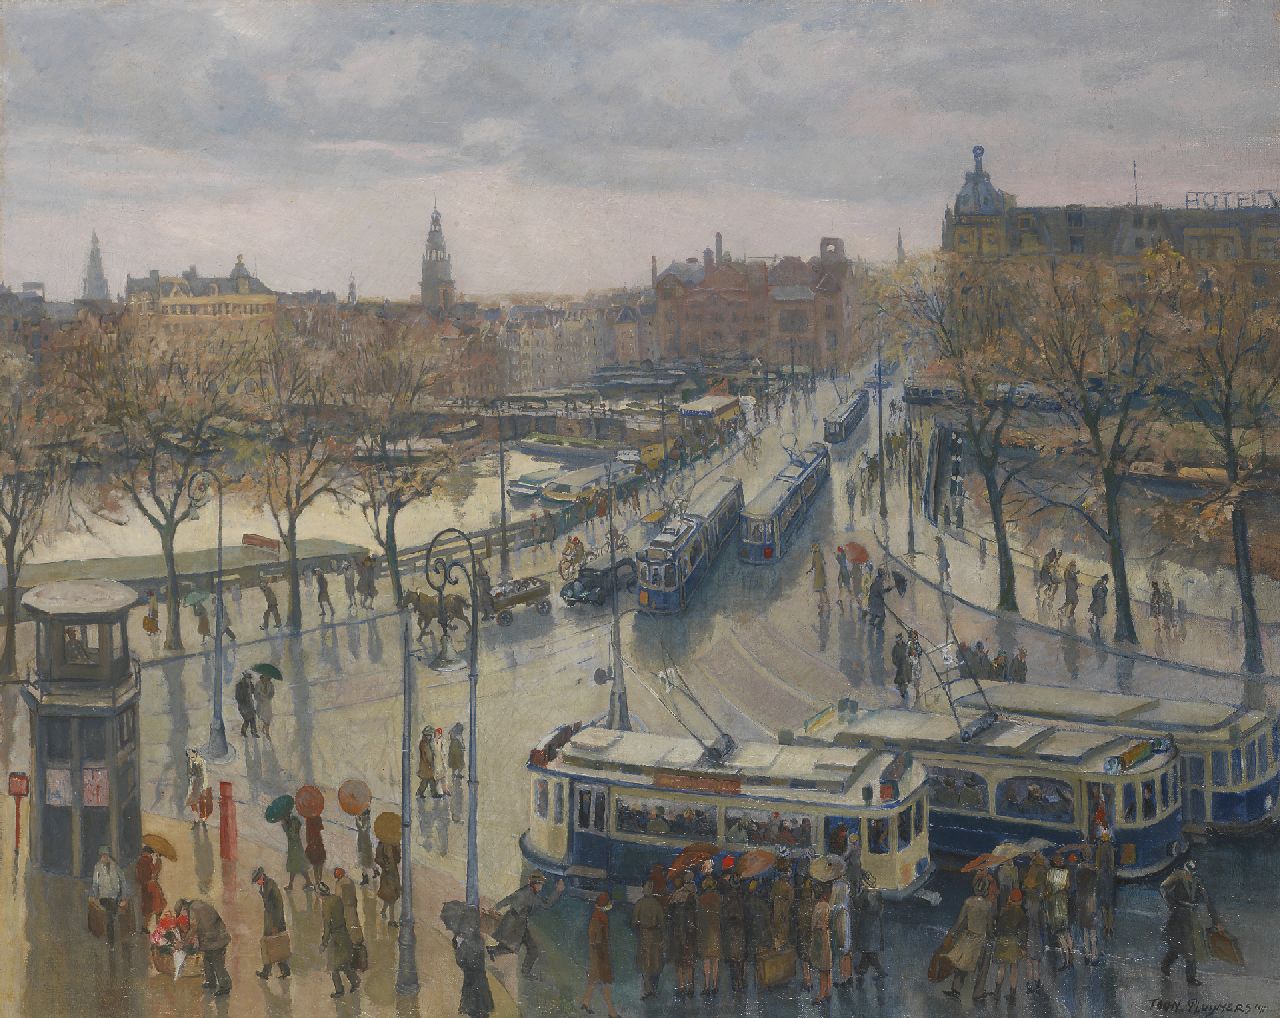 Pluijmers A.B.  | Anthonie Bernardus 'Toon' Pluijmers, The Stationsplein and Damrak, Amsterdam, oil on canvas 80.5 x 100.0 cm, signed l.r. and dated '41